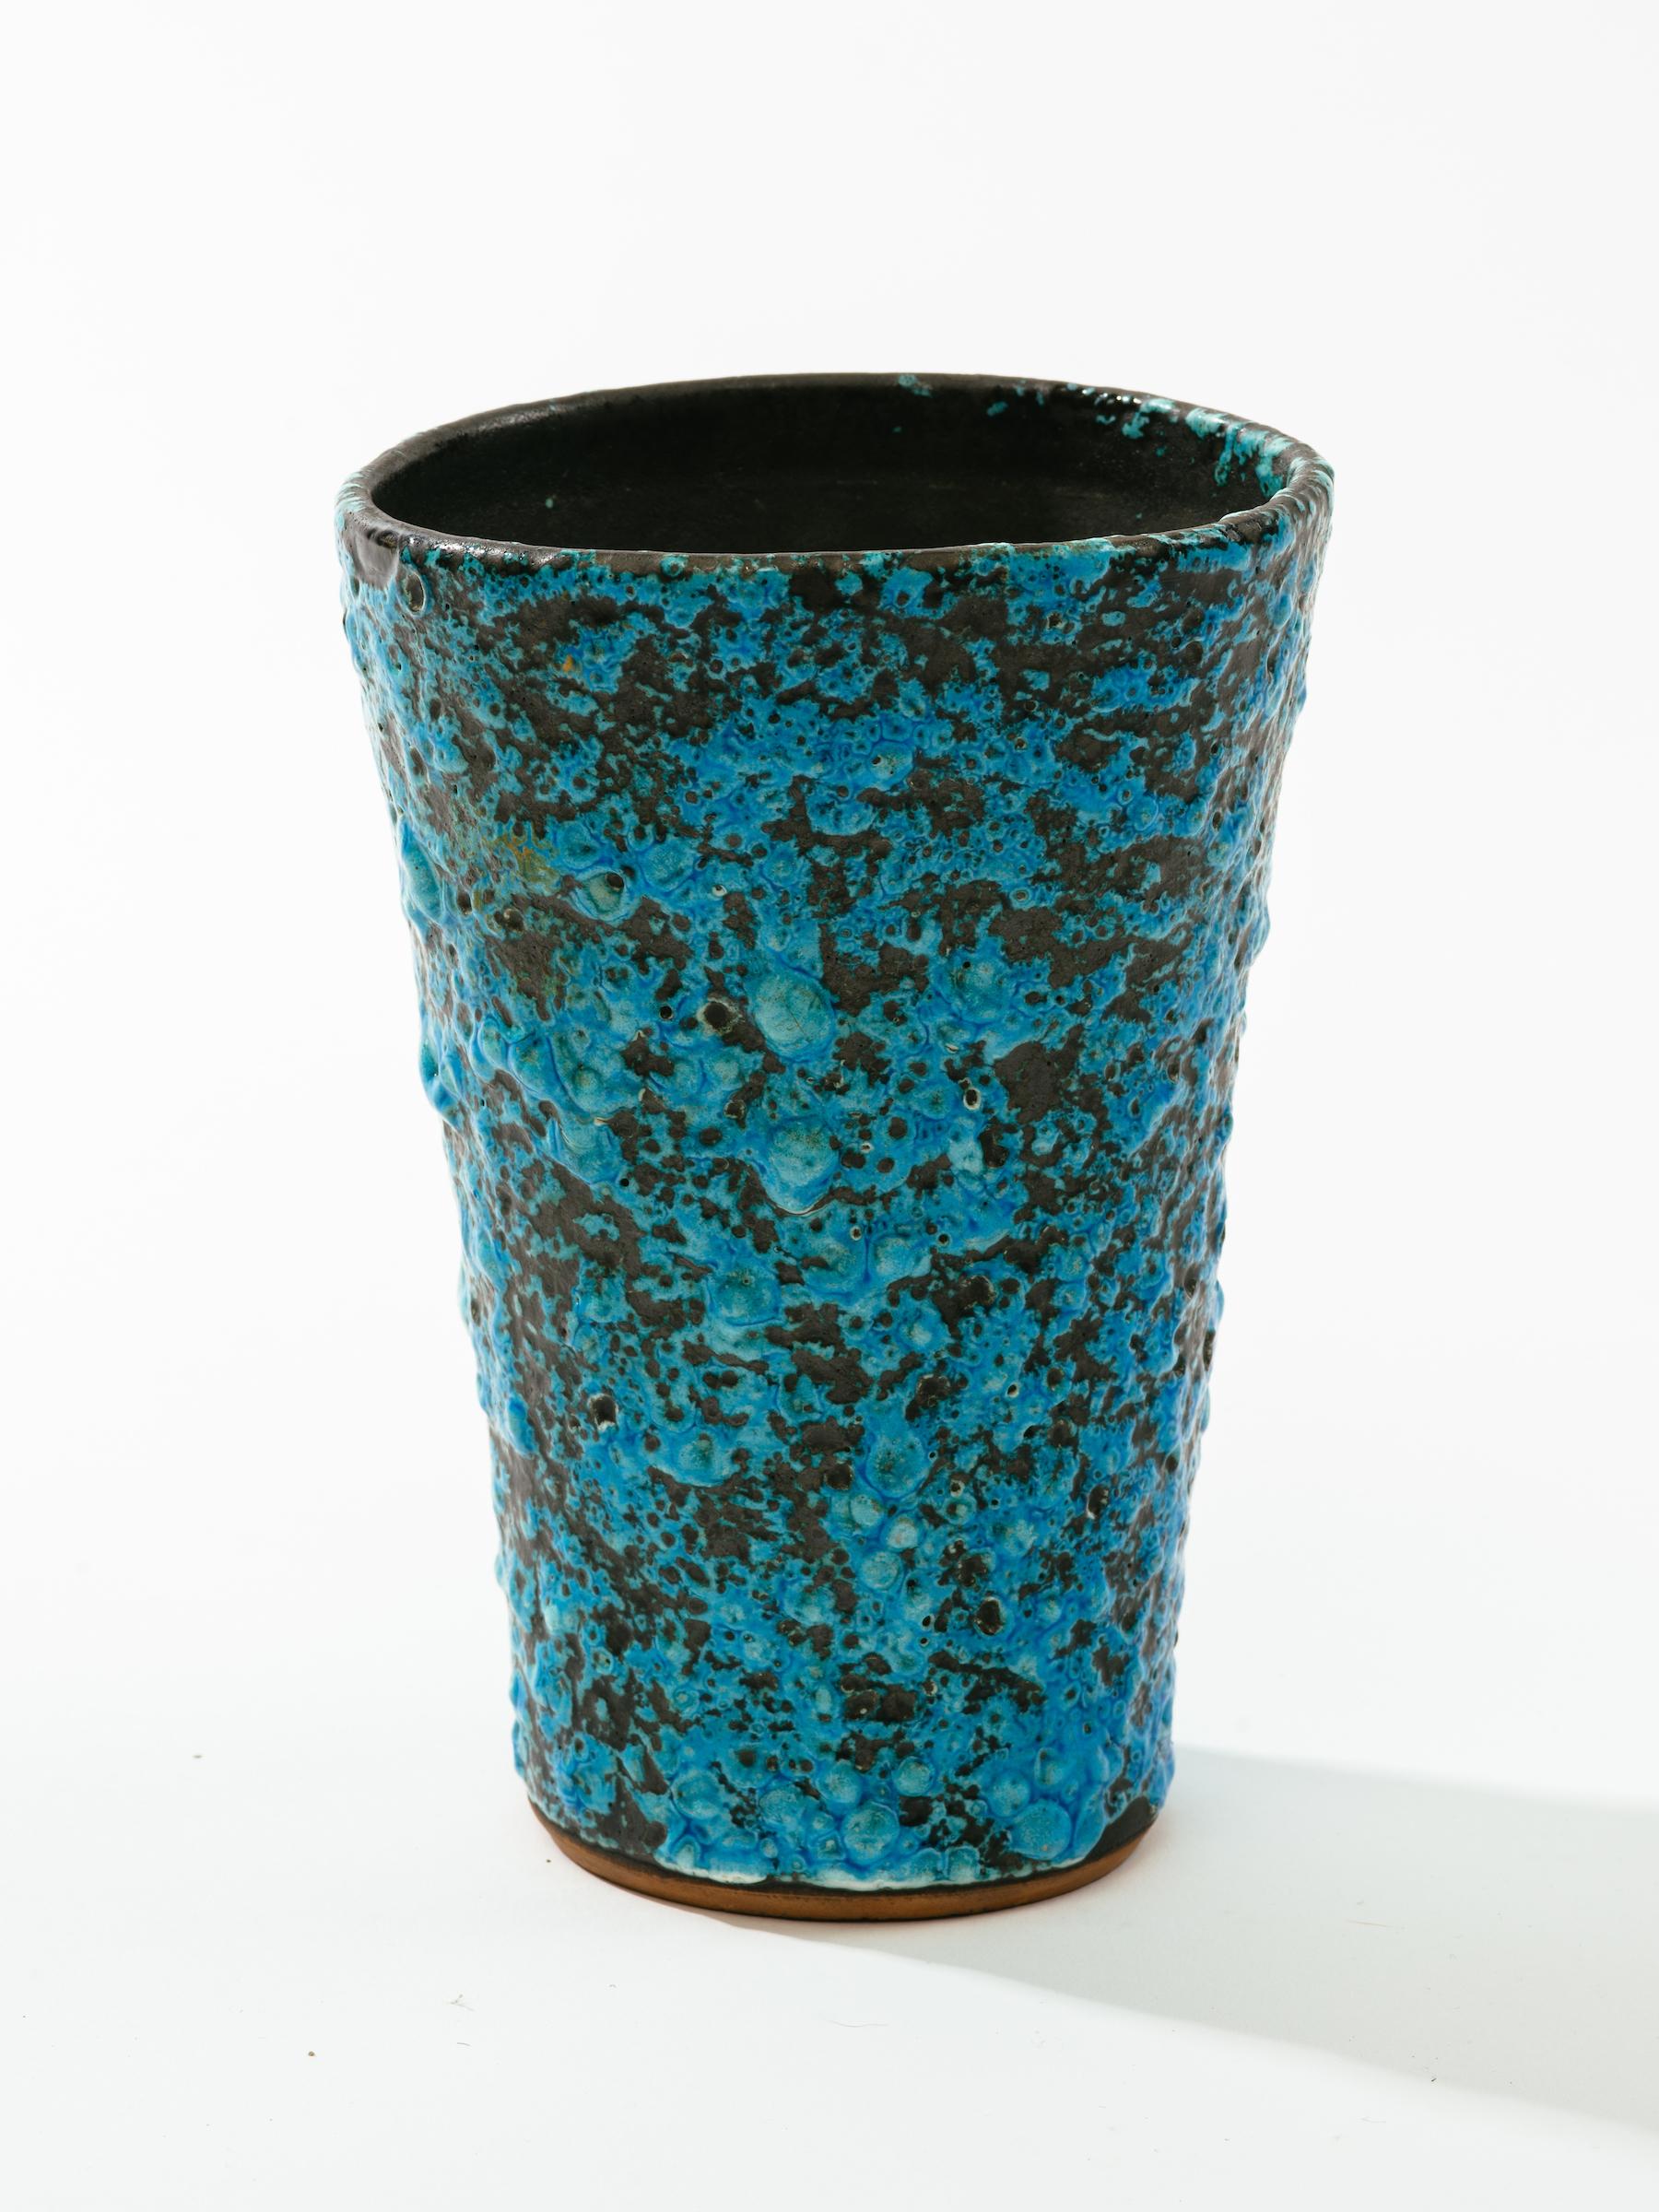 Rich turquoise hand thrown pottery vase with textural volcanic glaze. Italy, circa 1960s.